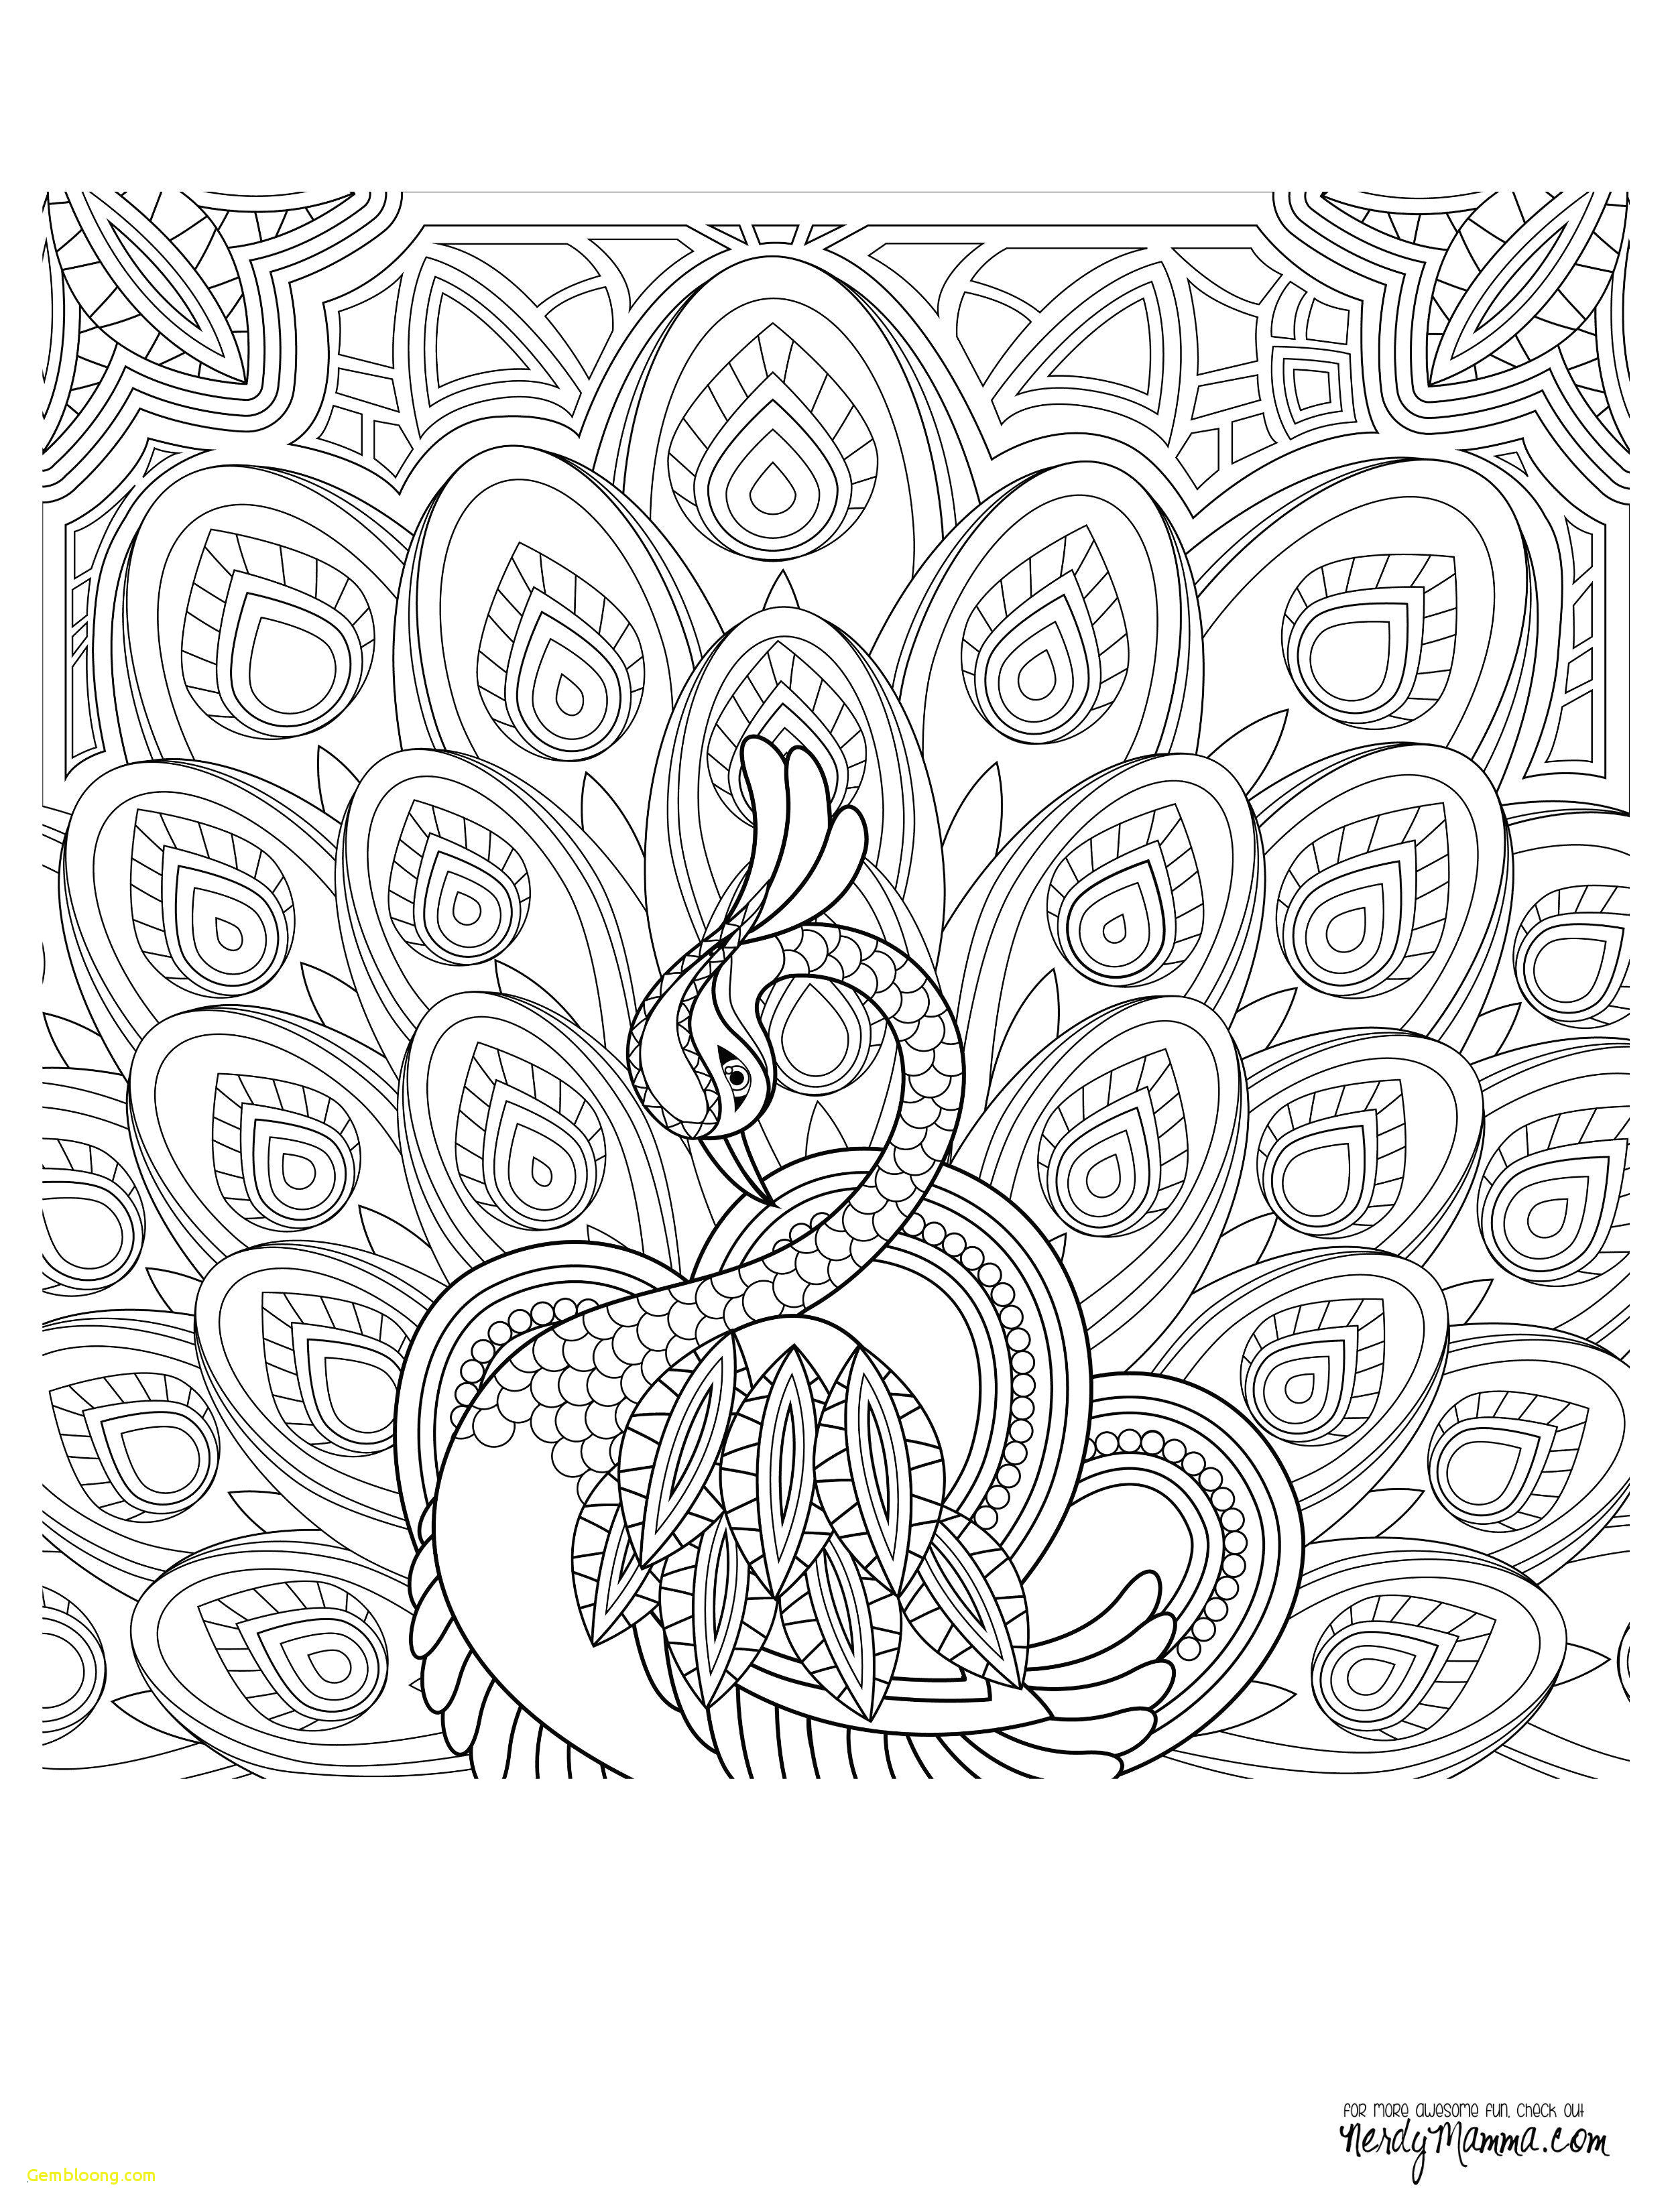 Drawing Of Flower Vase with Design 29 Ideal Draw A Flower